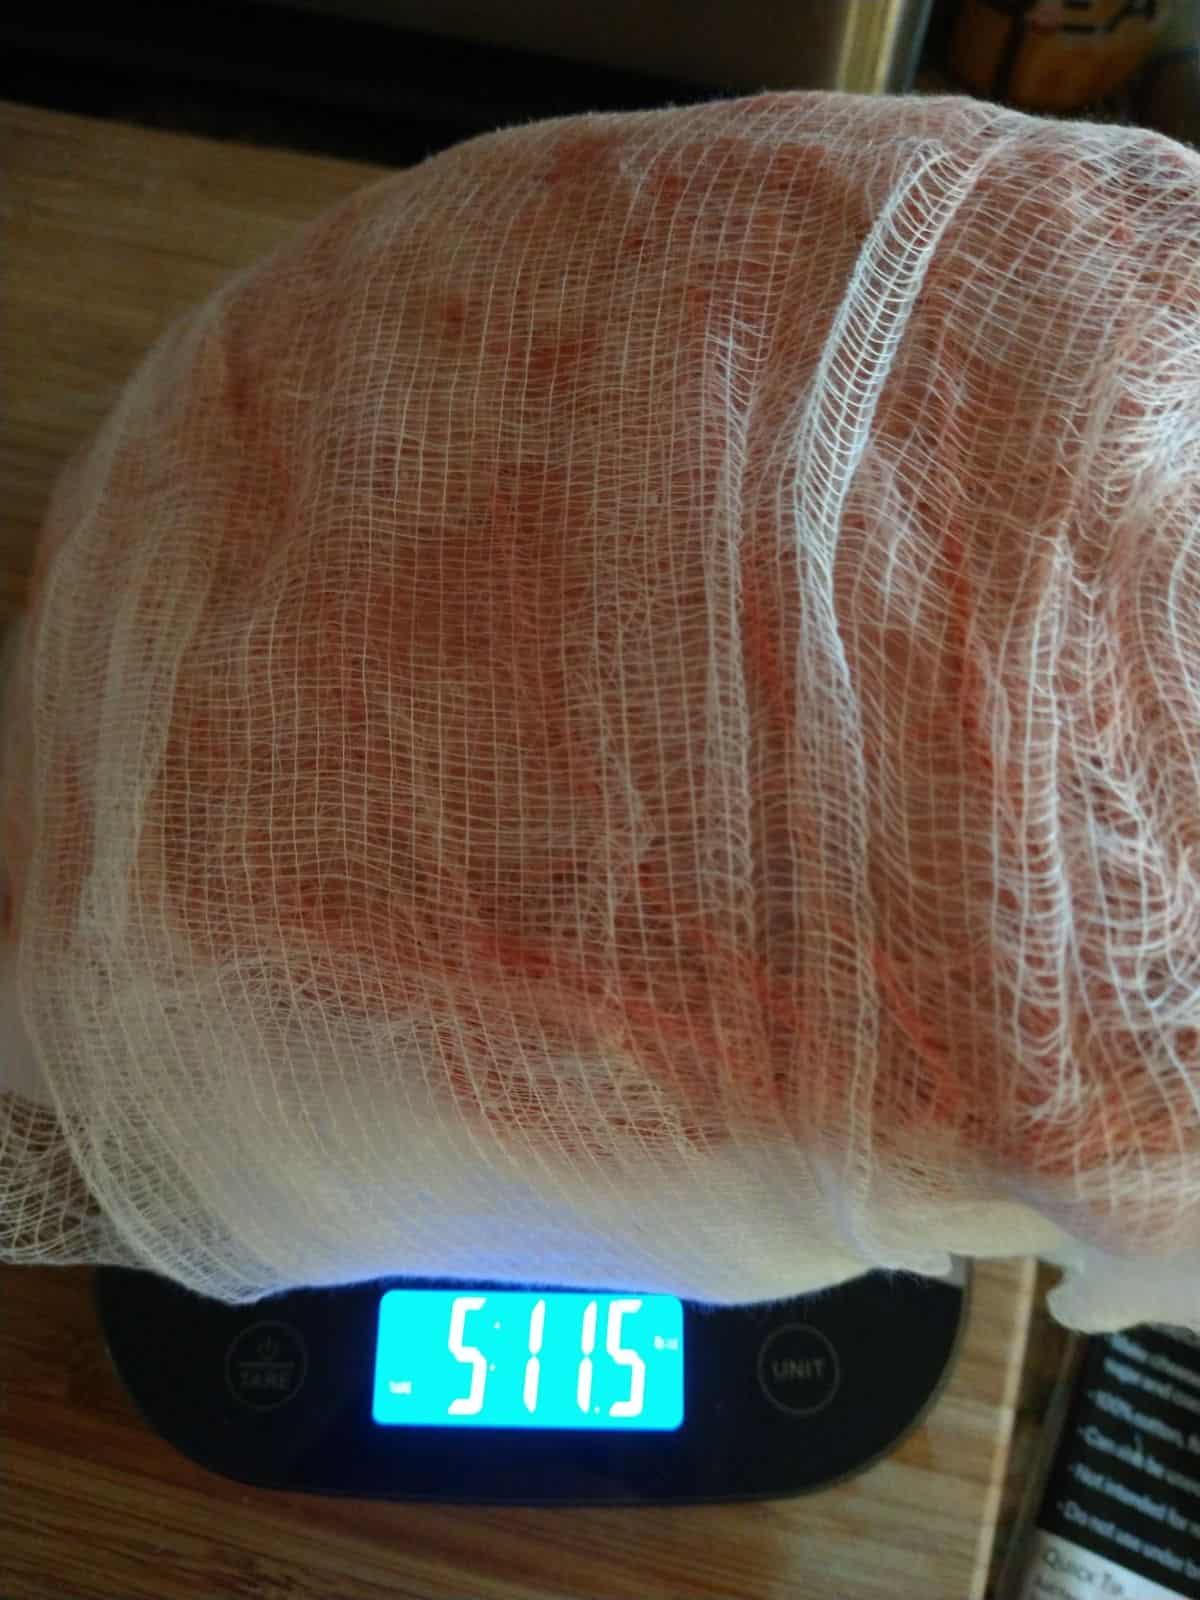 A cheesecloth wrapped standing rib roast on a scale showing it weighs 5 pounds 11.5 ounces.